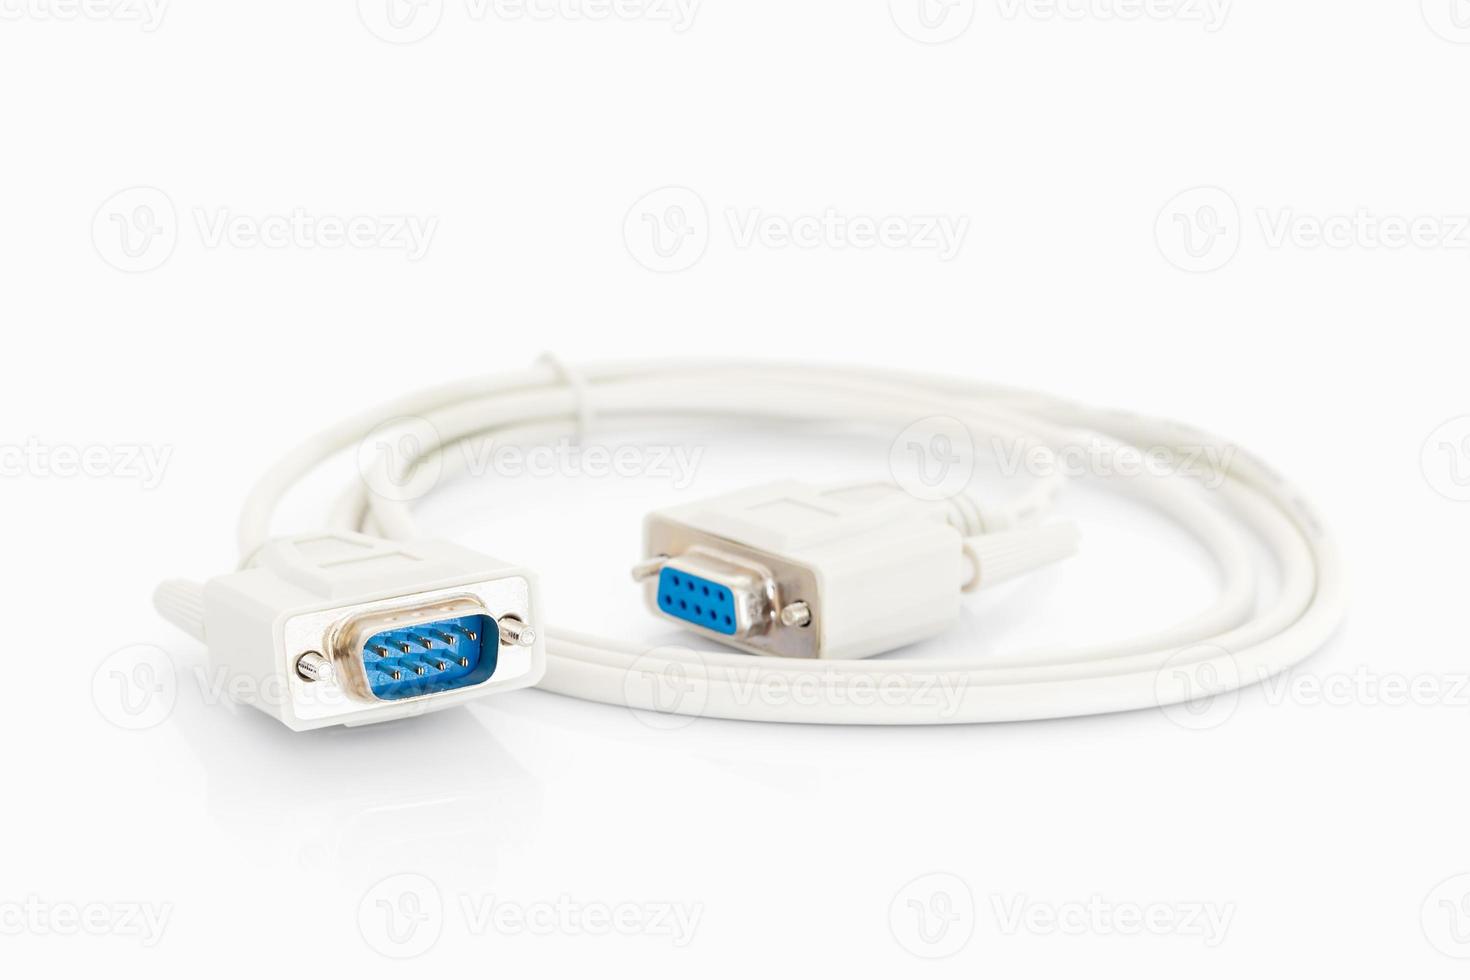 VGA cables connector with white cord photo